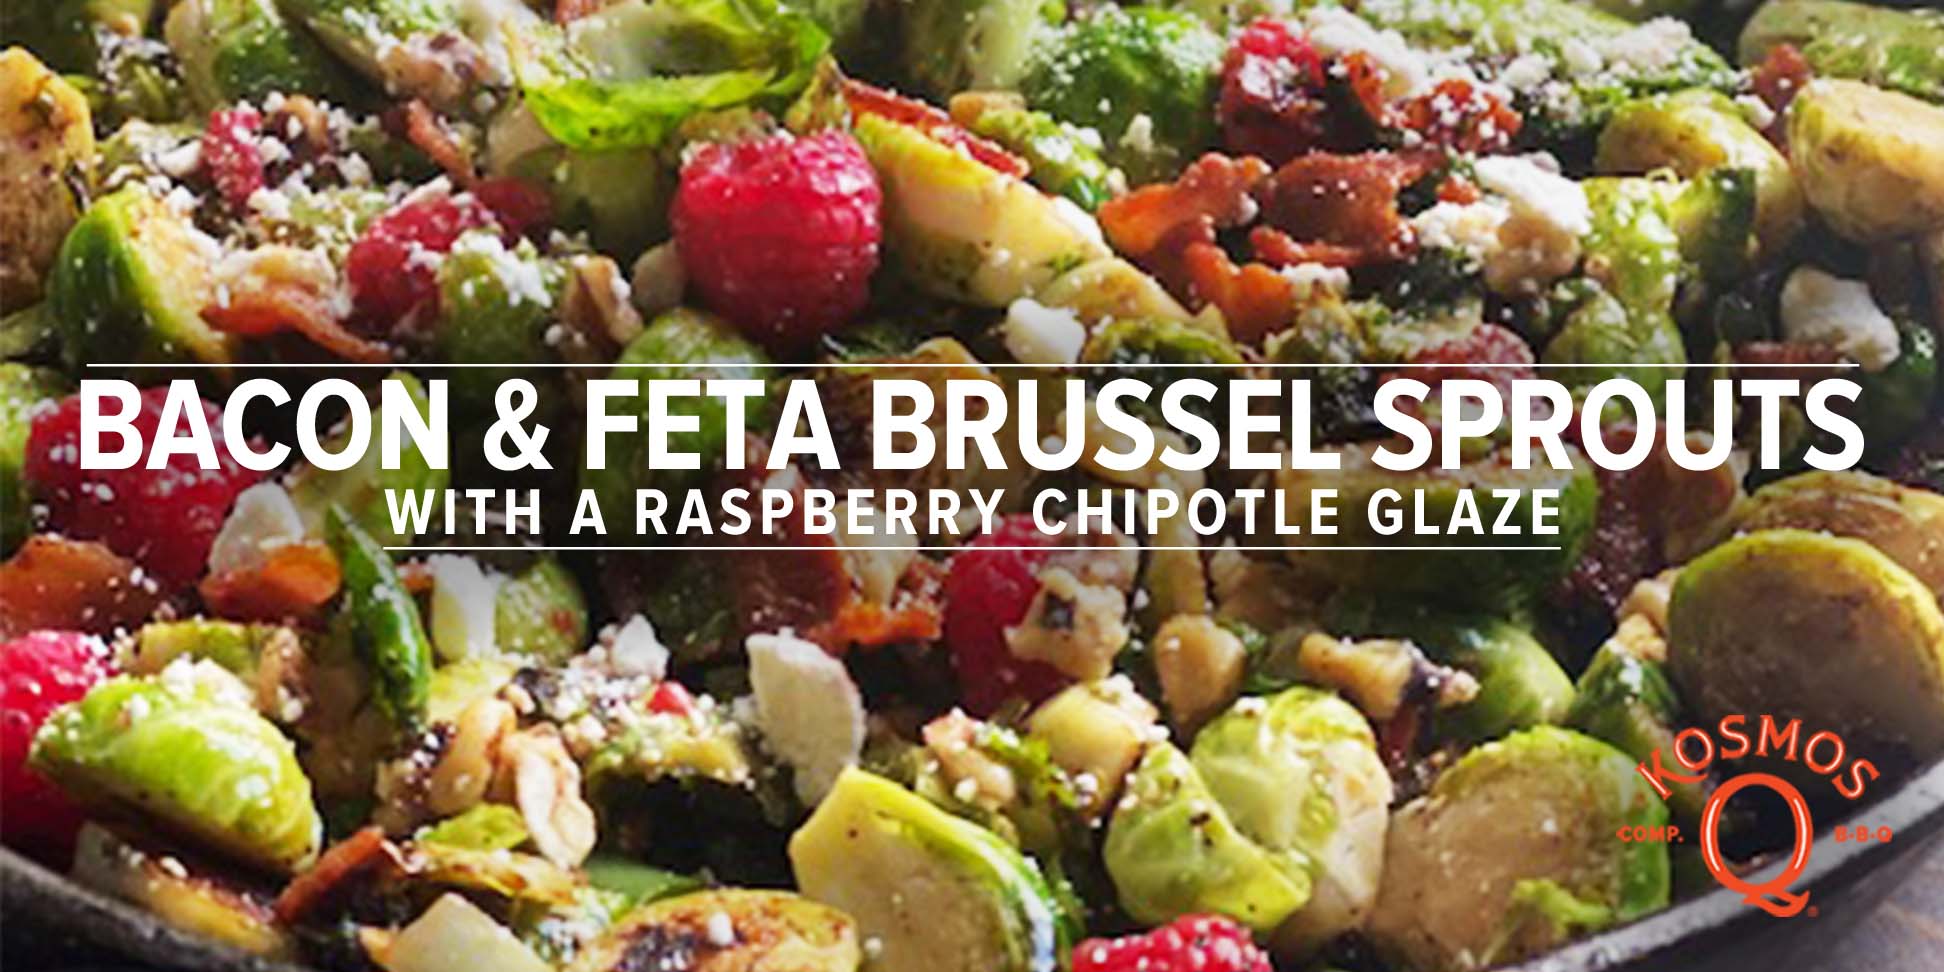 Bacon & Feta Brussel Sprouts (with a Raspberry Chipotle Glaze)